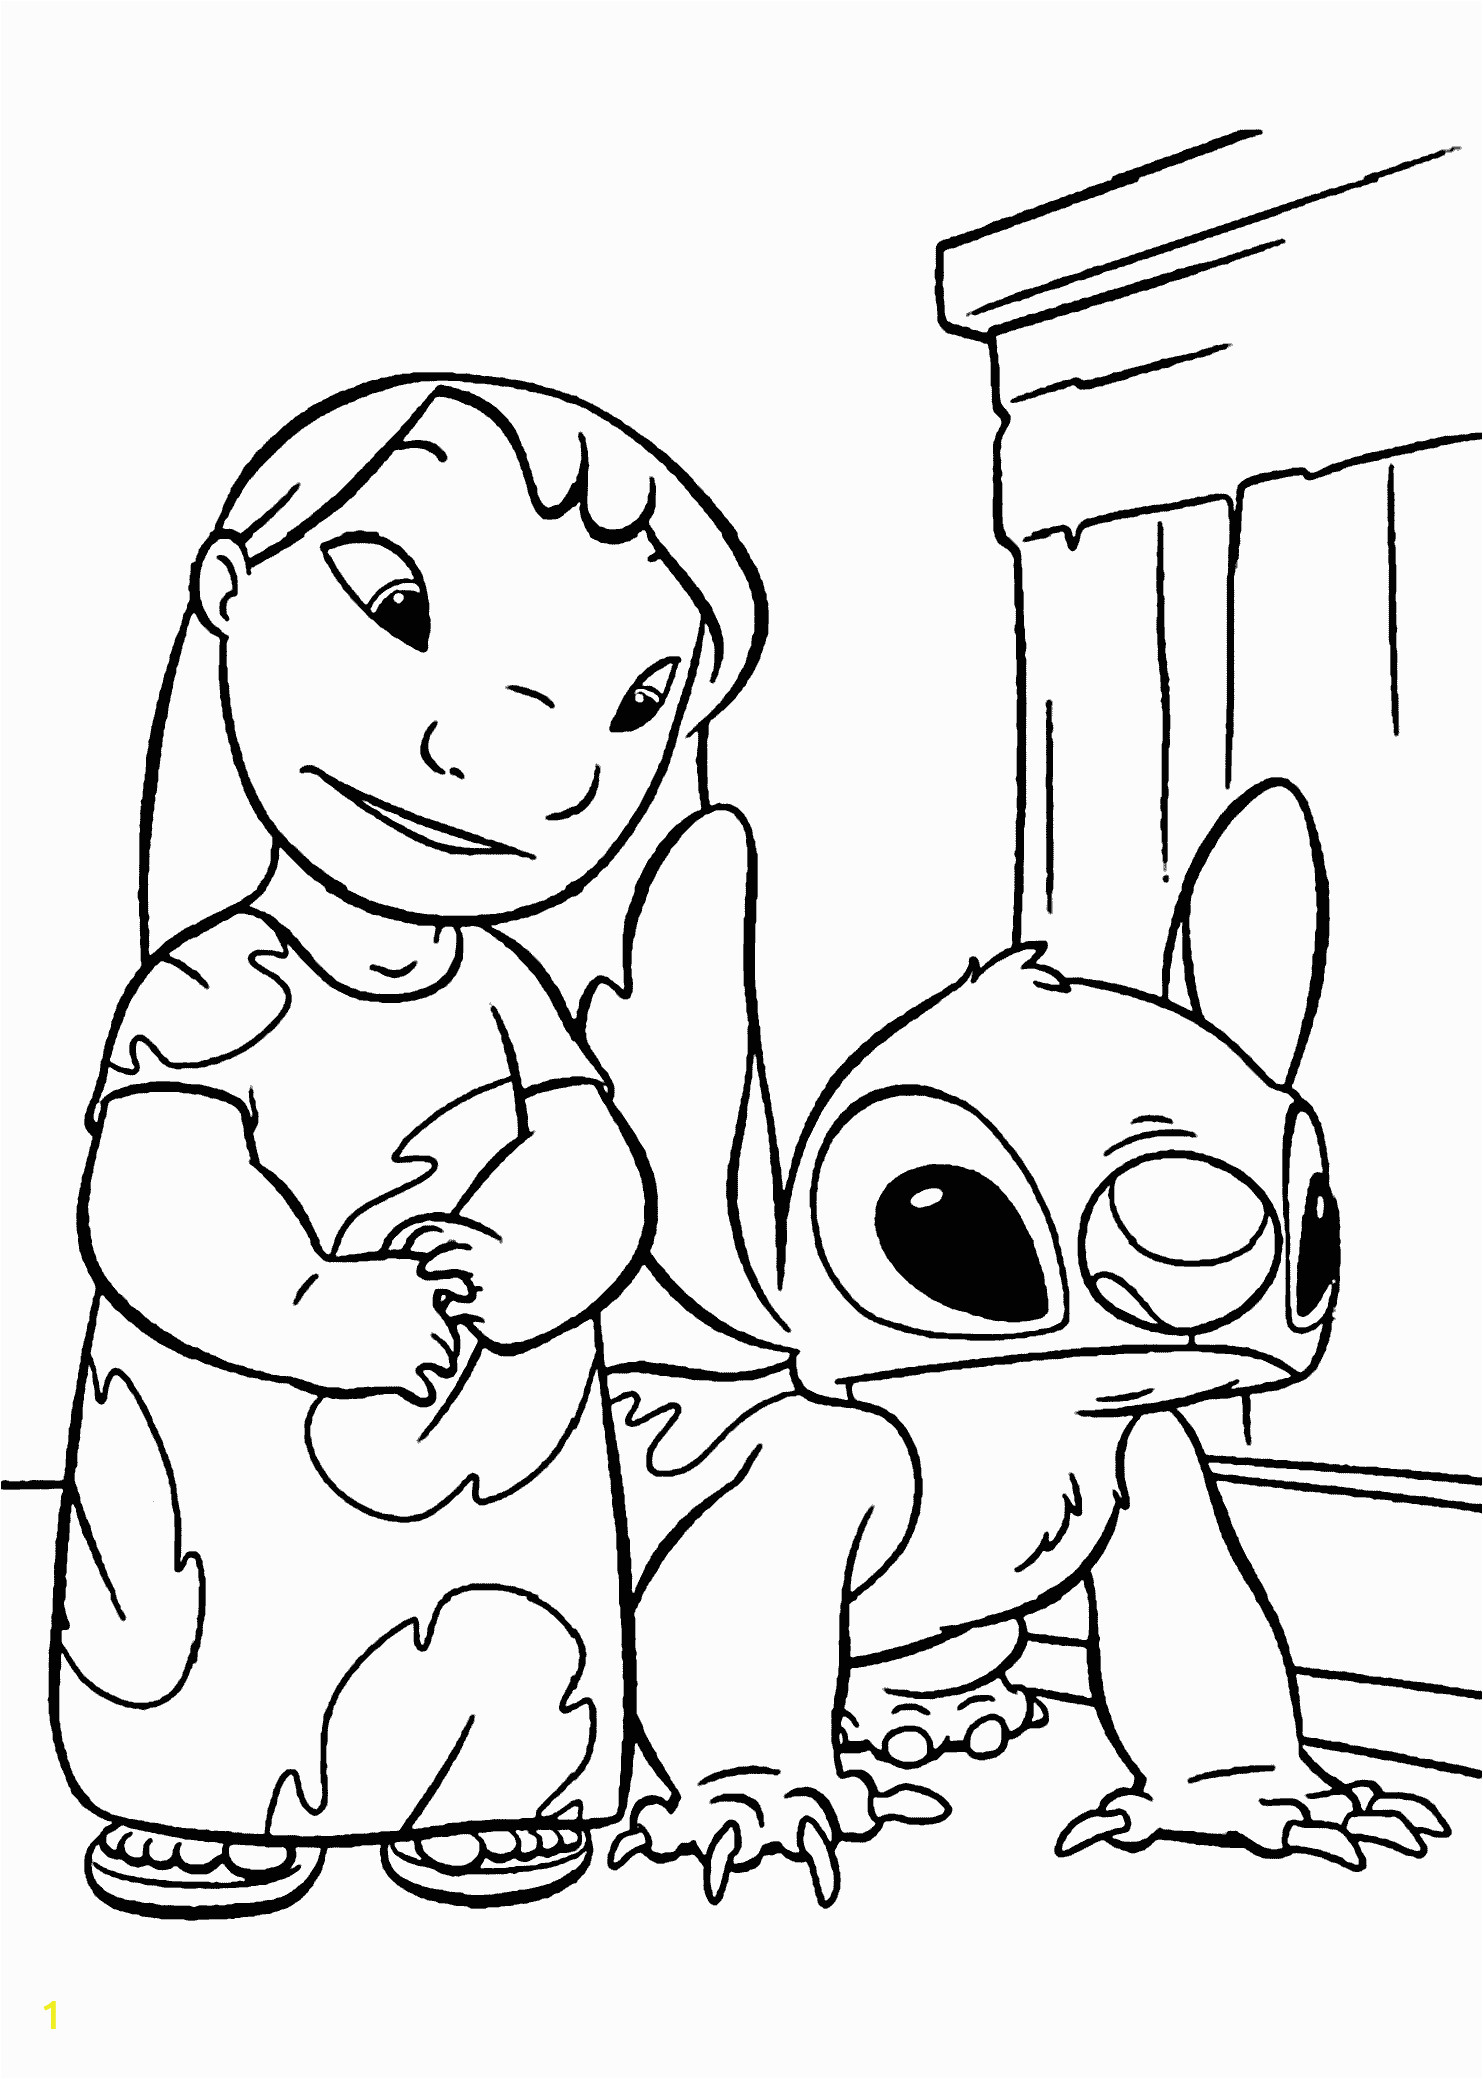 Printable Stitch Coloring Pages Lilo and Stitch New Coloring Pages for Kids Printable Free